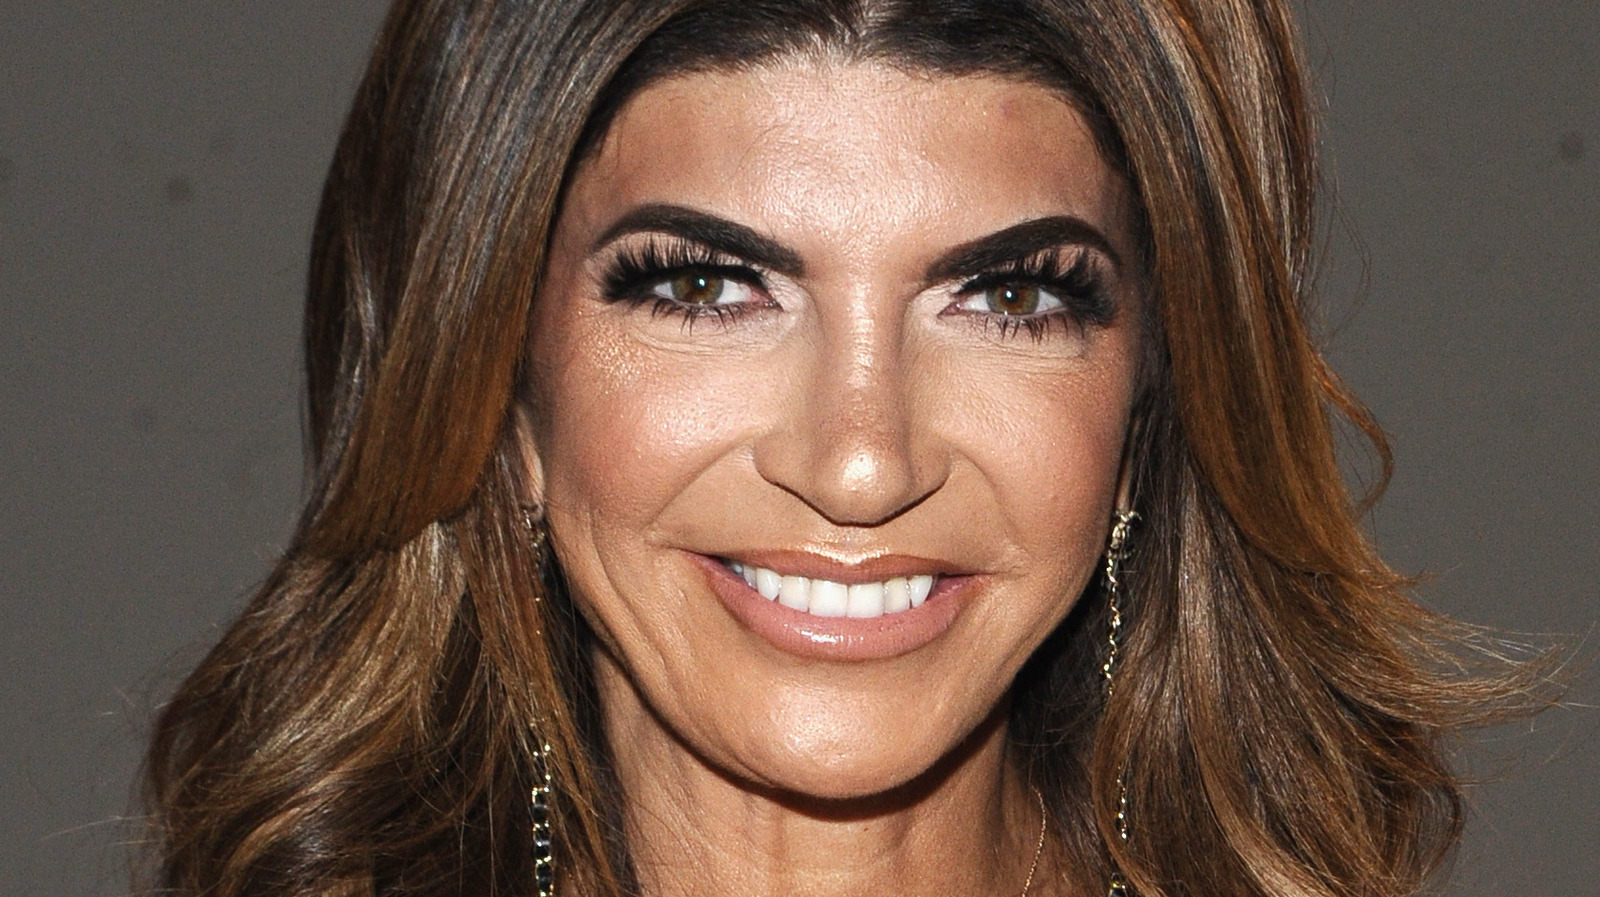 Teresa Giudice Teases Exciting Possibilities About Her Upcoming Wedding